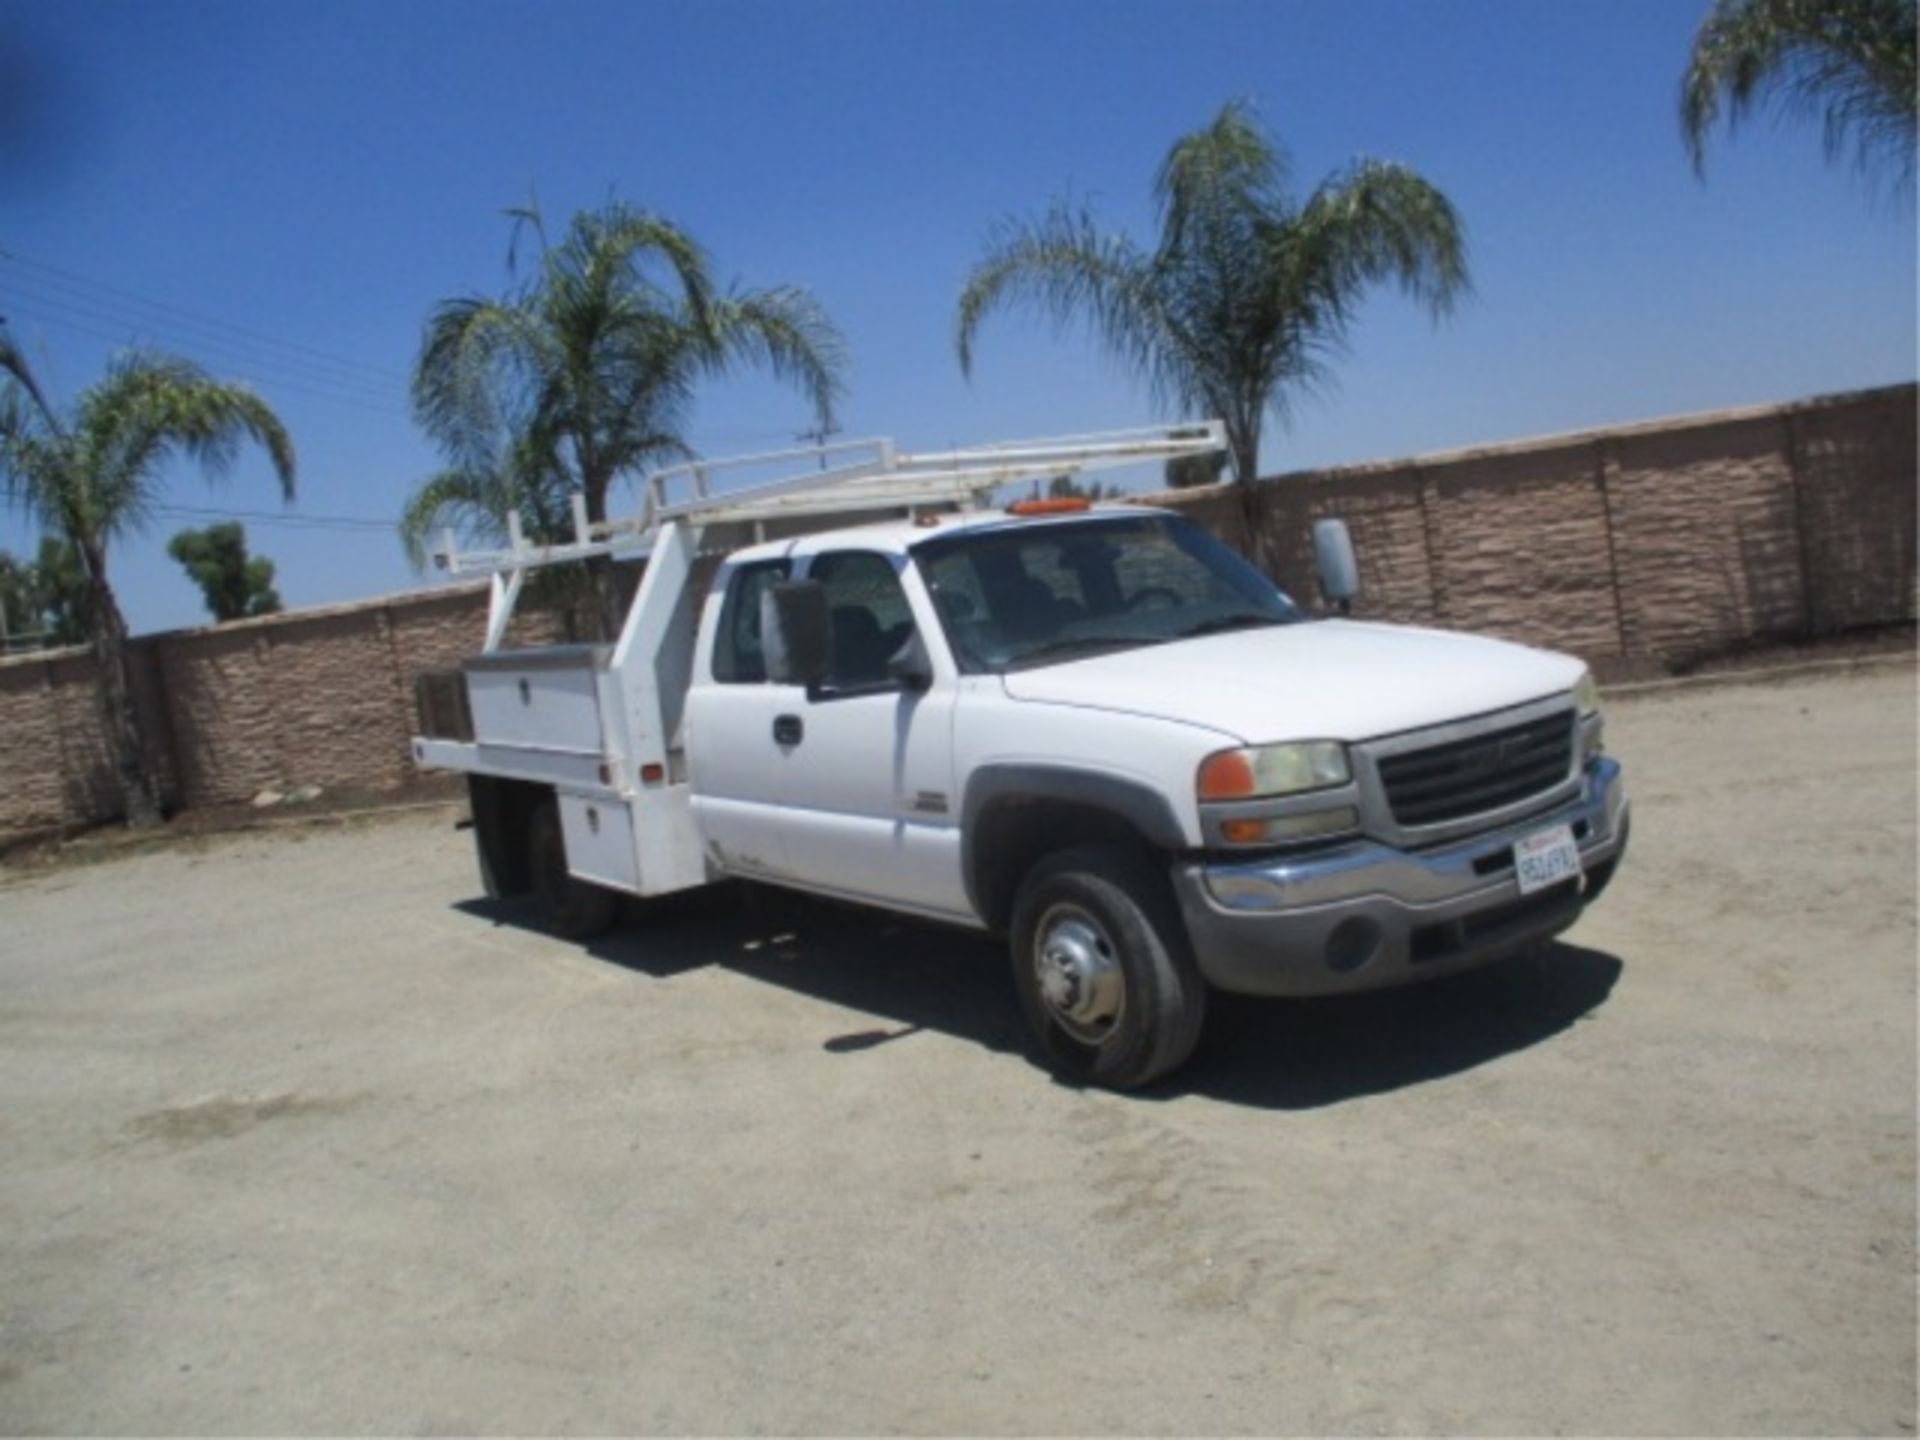 2006 Chevrolet 3500 Extended-Cab Utility Truck, 6.6L Turbo Diesel, Automatic, Tool Boxes, Lumber - Image 11 of 71